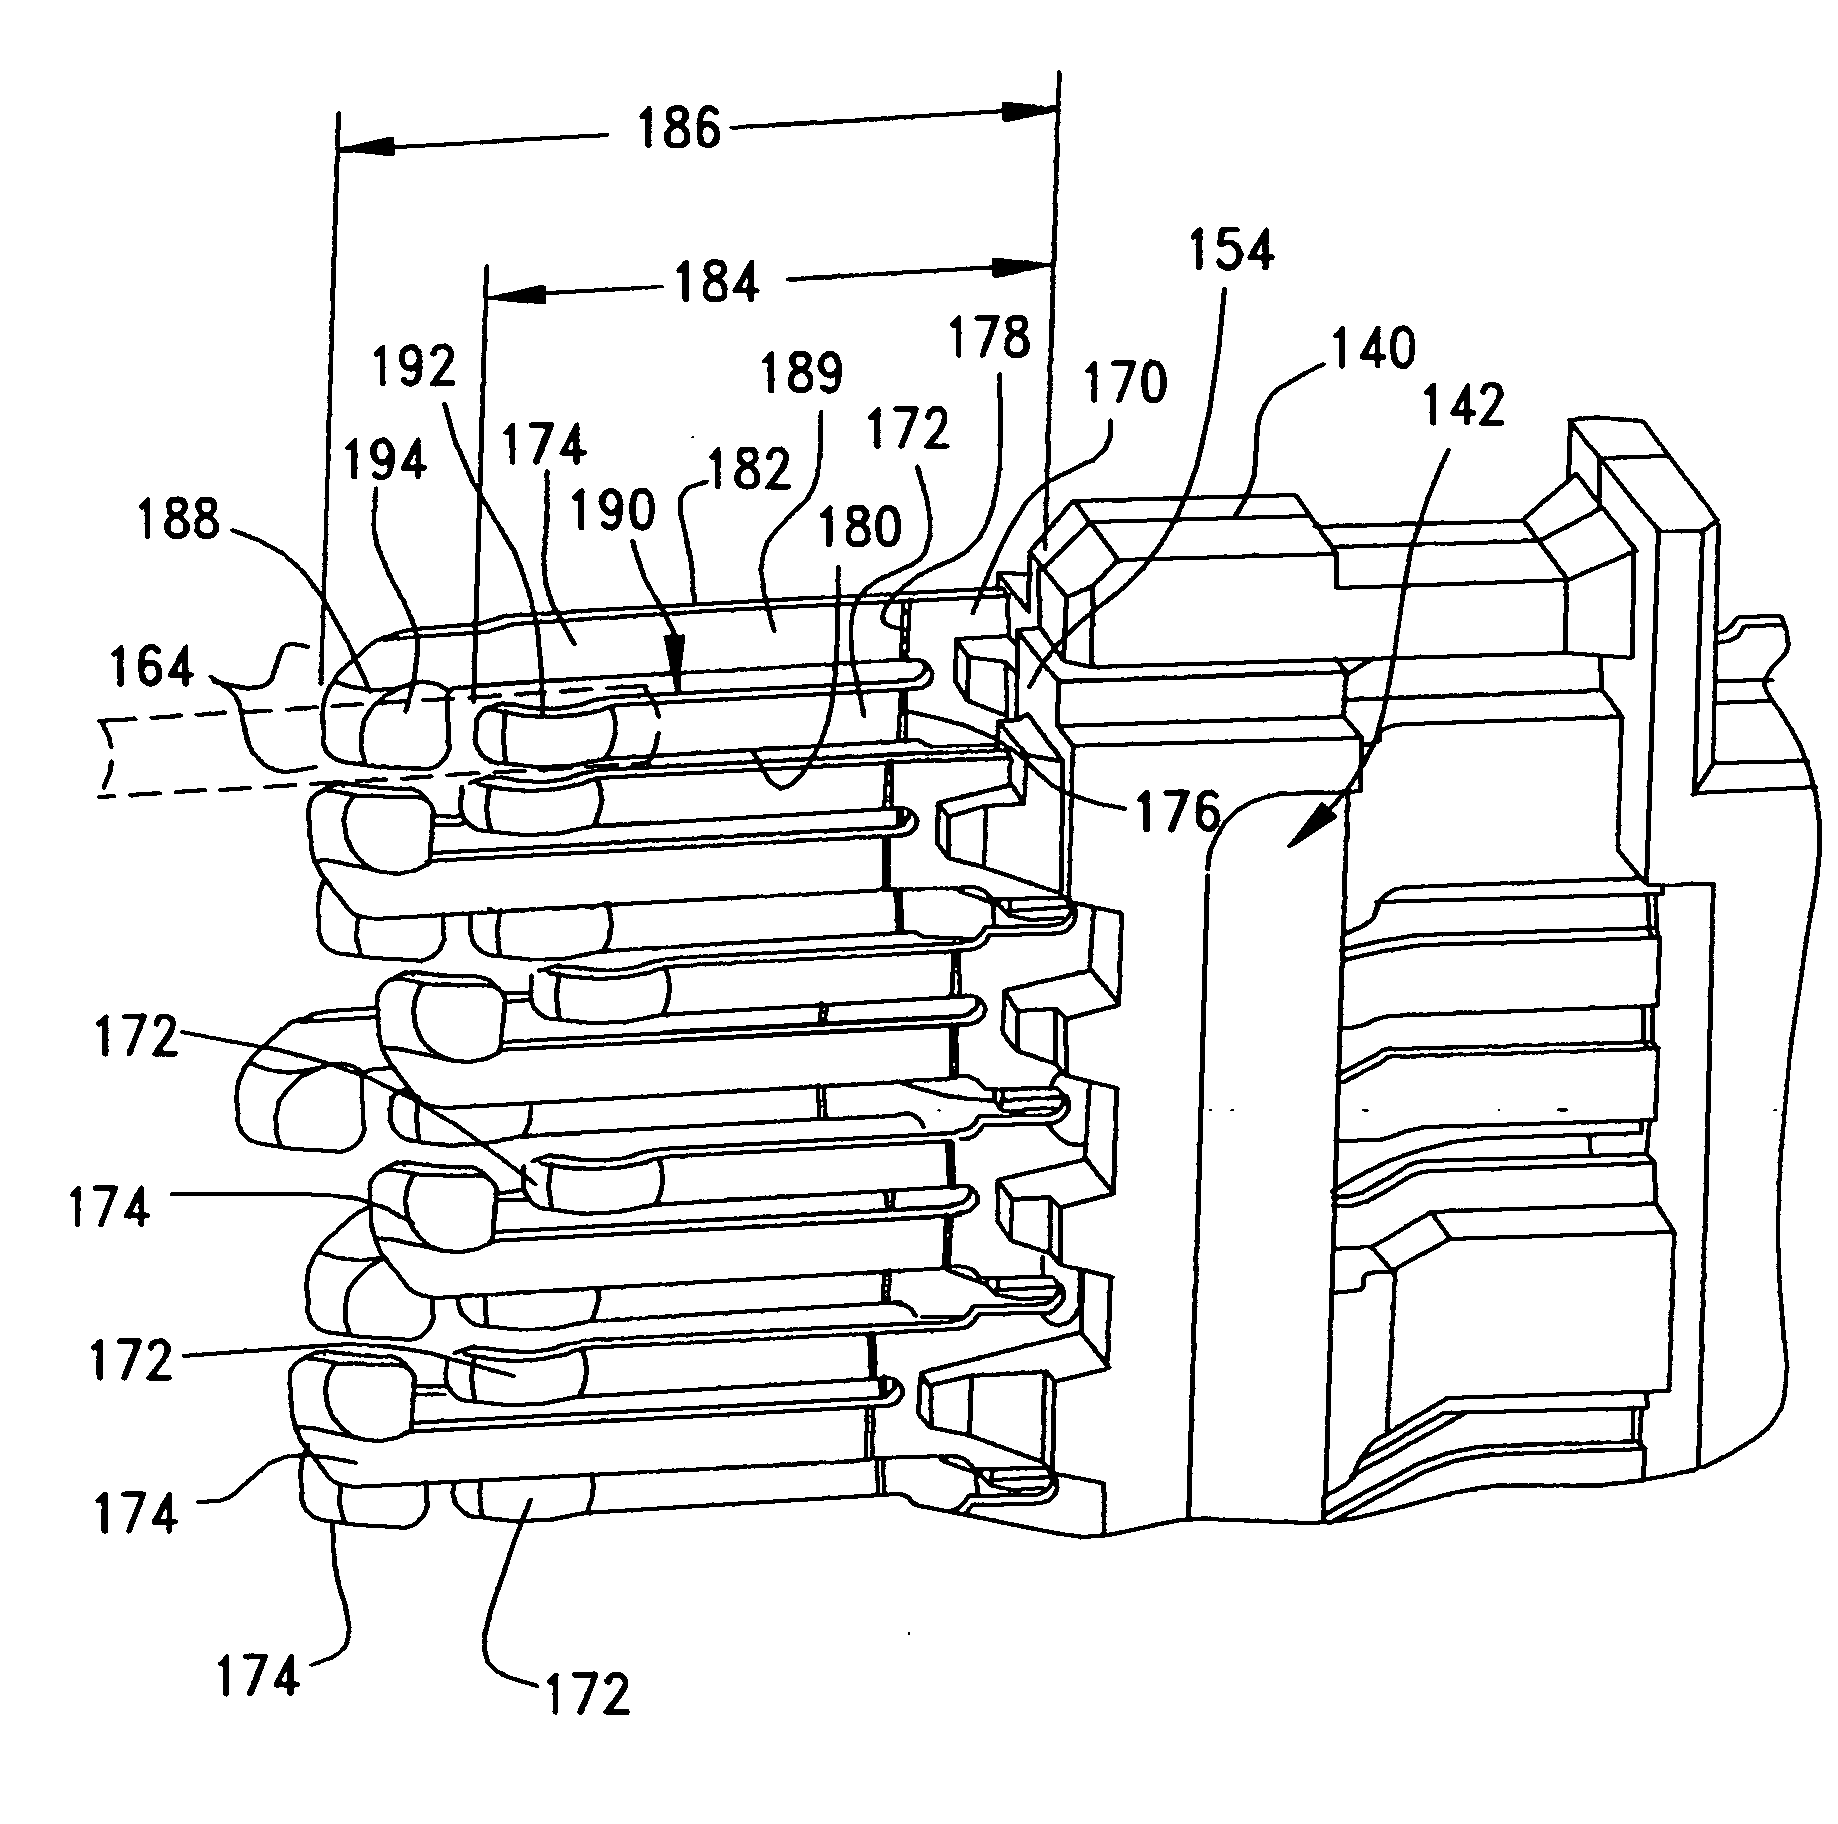 Connector with bifurcated contact arms